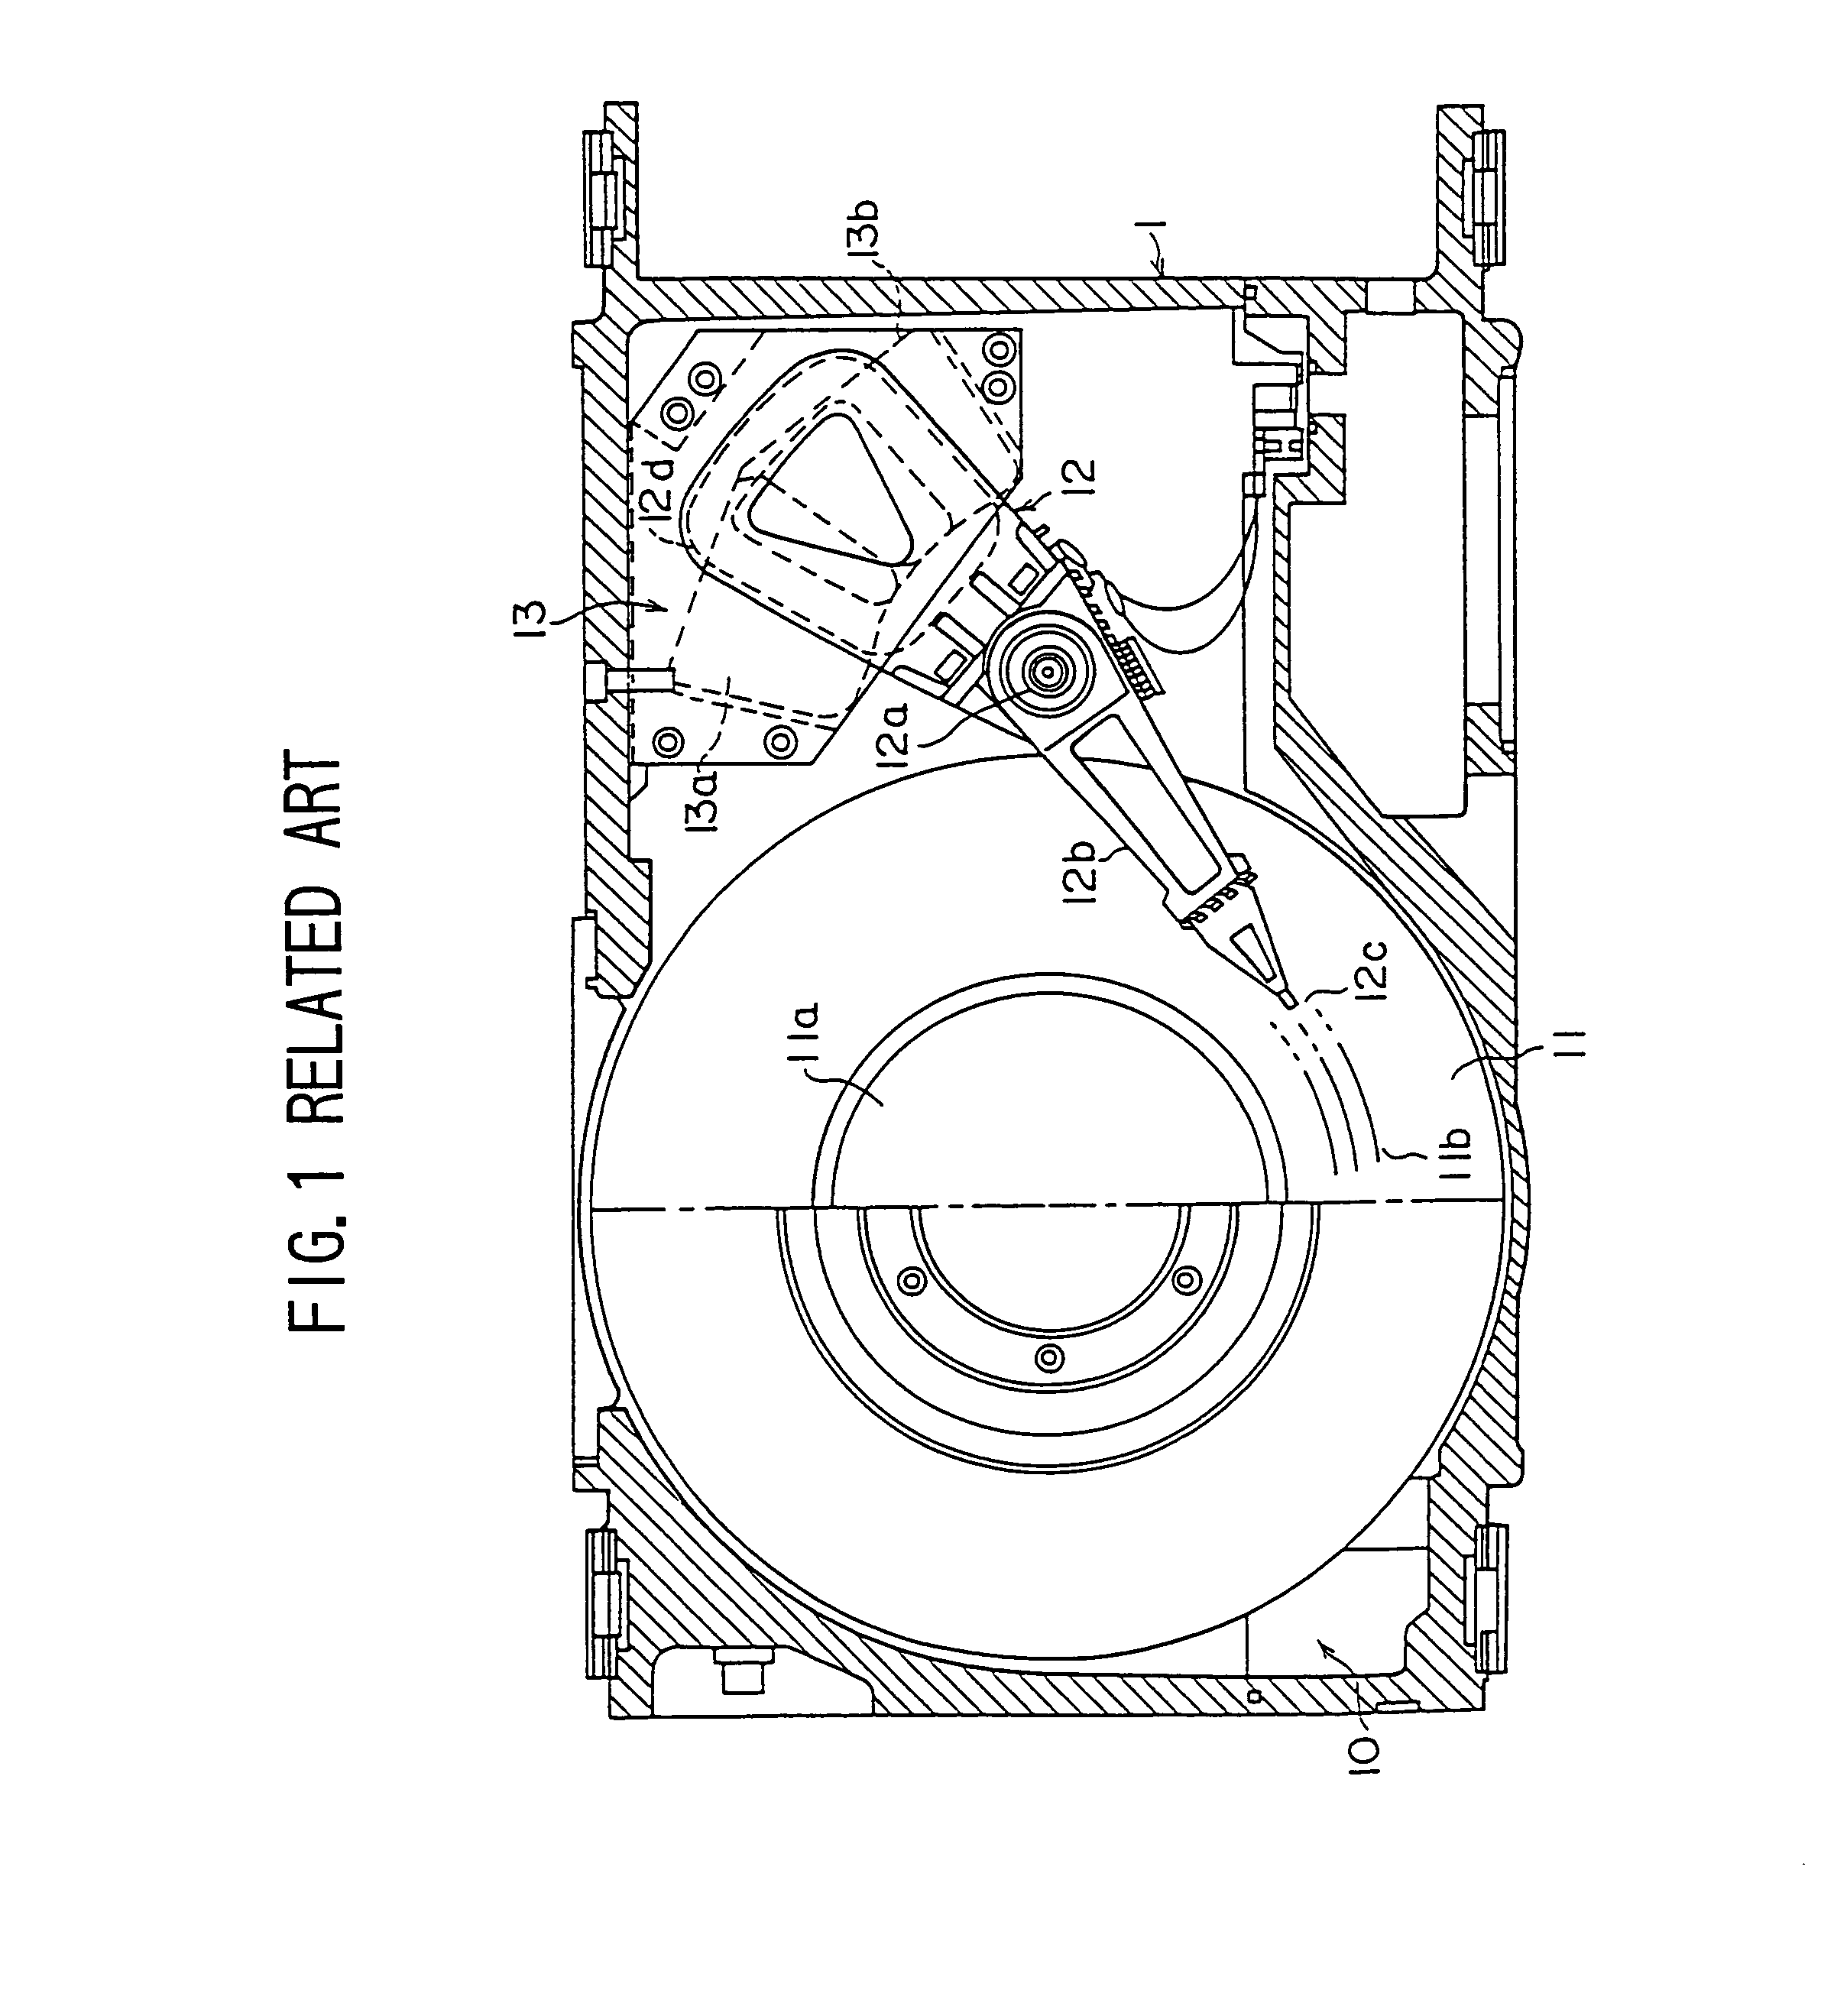 Magnetic disk drive having a surface coating on a magnetic disk